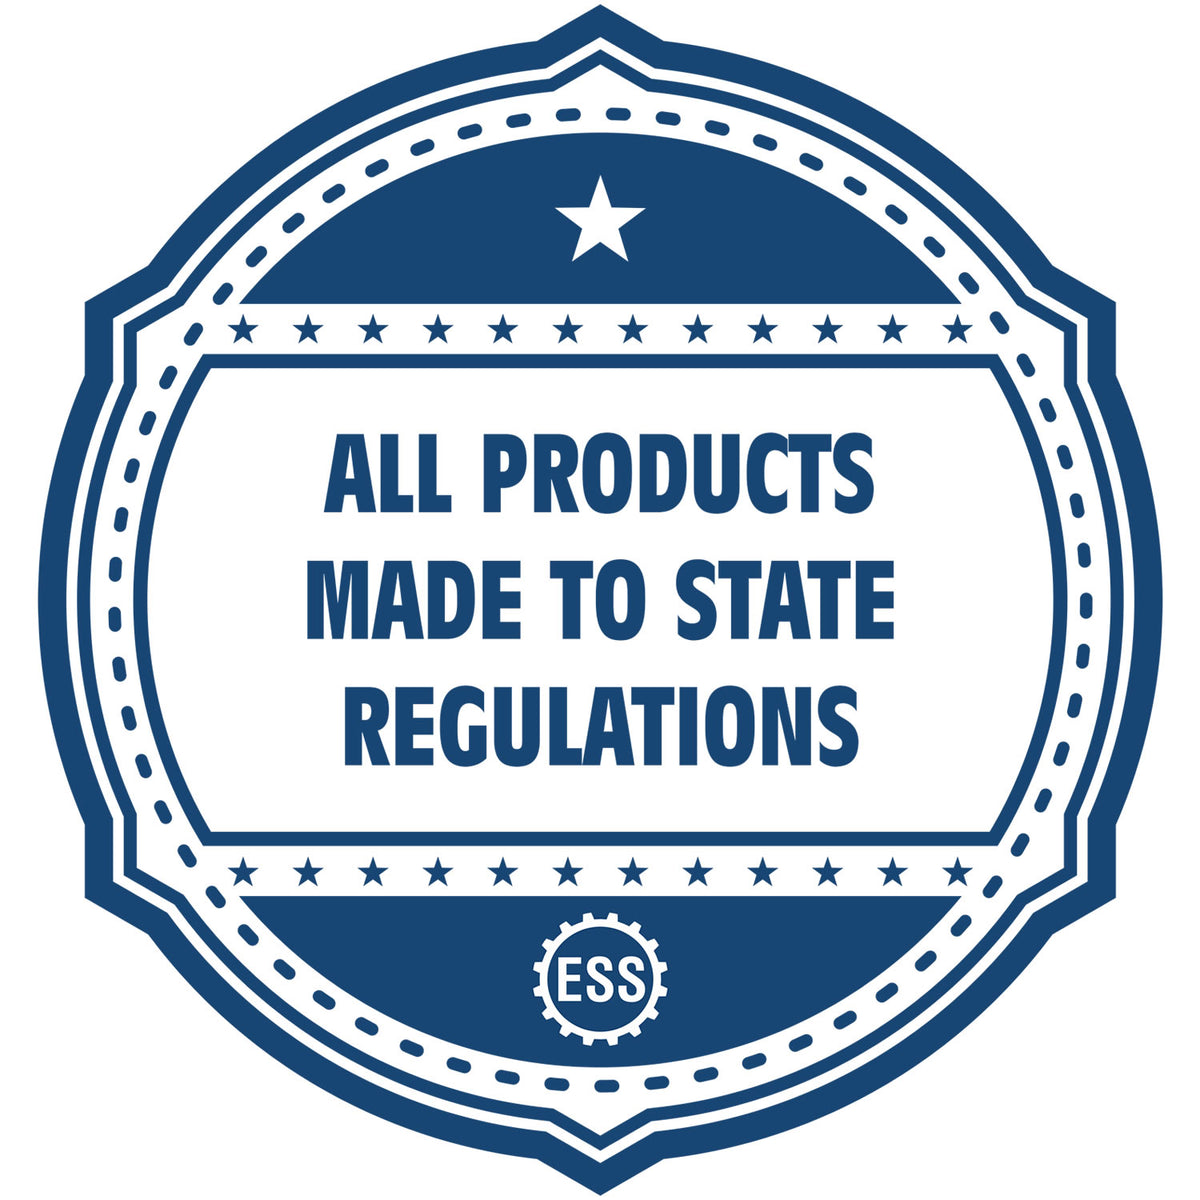 A blue icon or badge for the Soft New York Professional Geologist Seal showing that this product is made in compliance with state regulations.